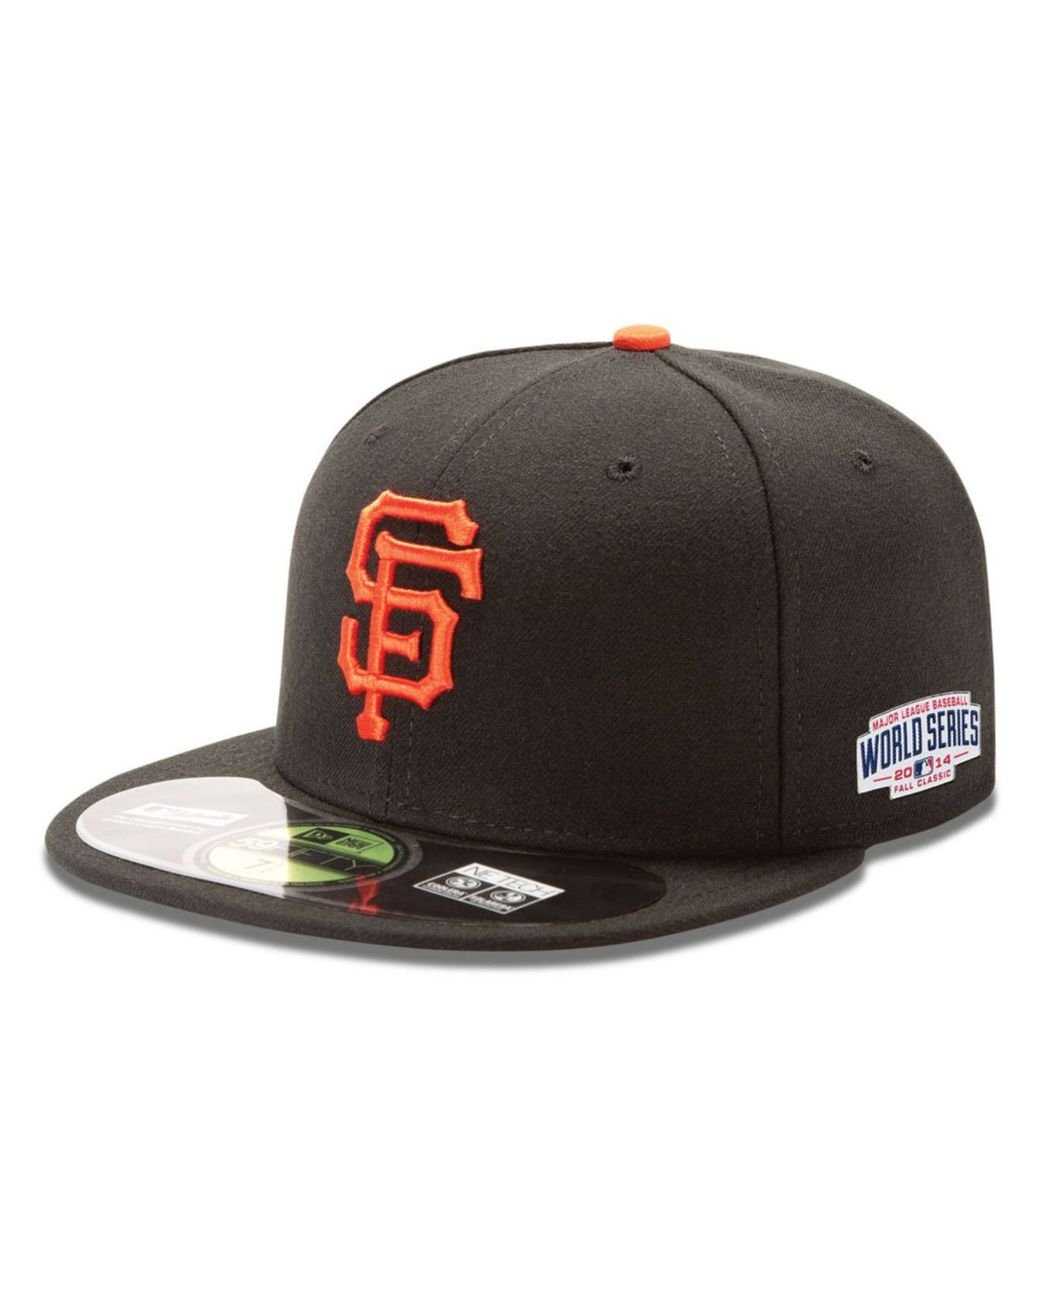 Men's New Era Pink San Francisco Giants 2014 MLB World Series 59FIFTY Fitted Hat